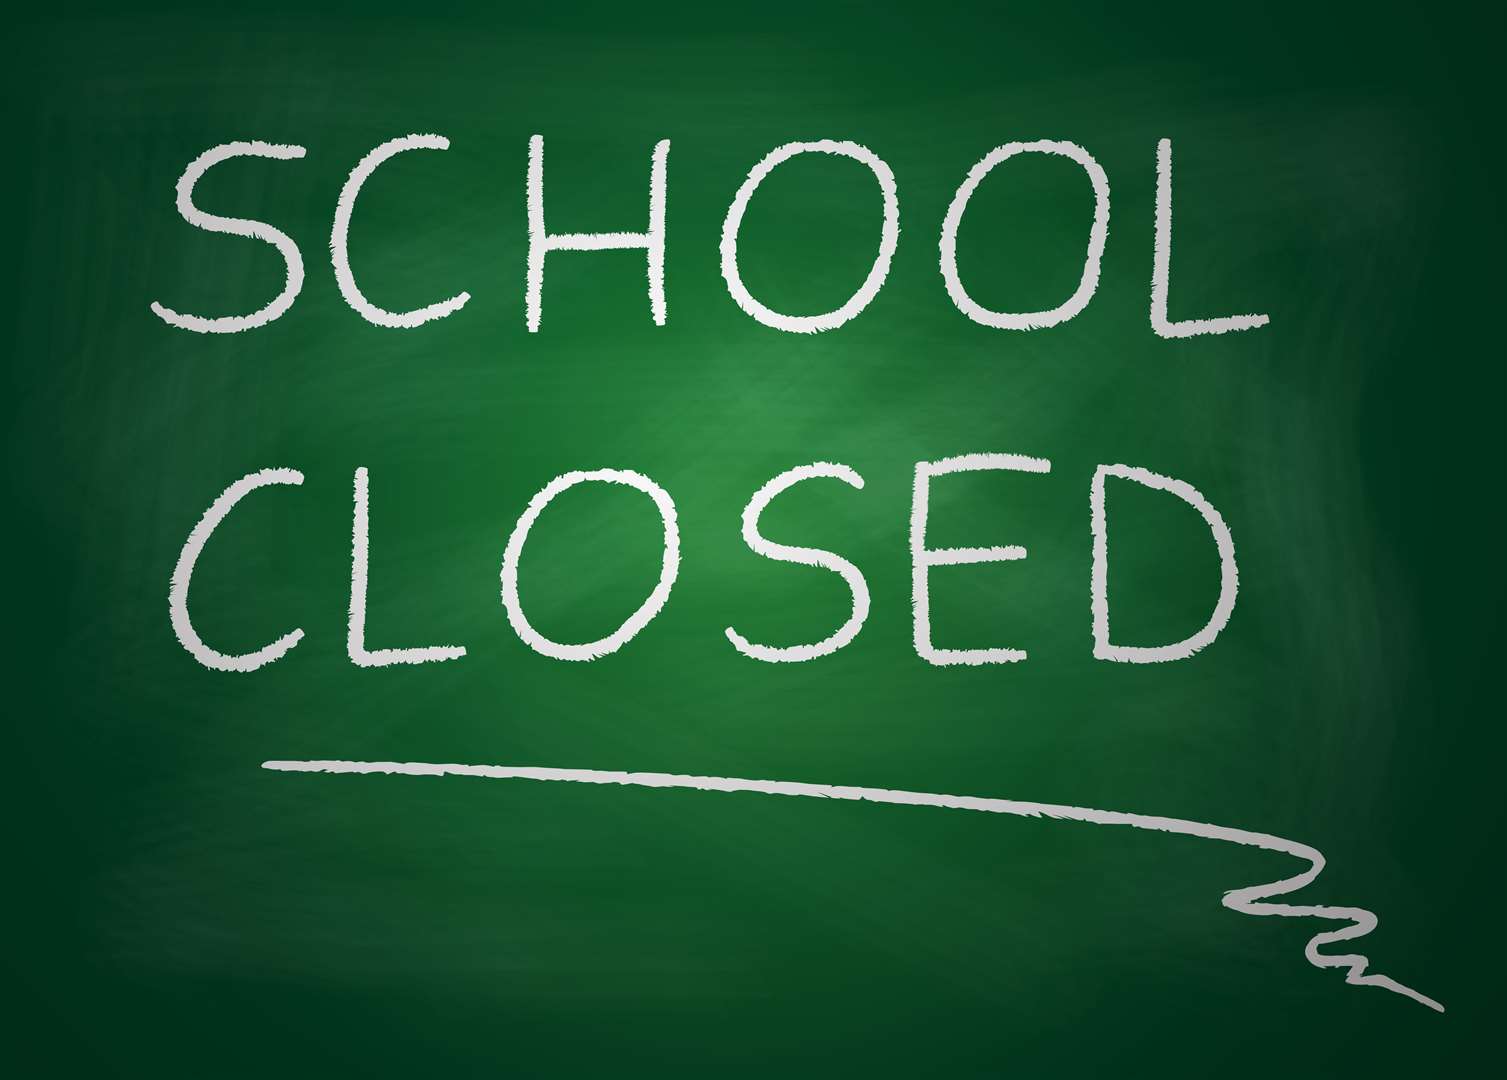 Primary schools and nurseries across north-west Sutherland are closed today.